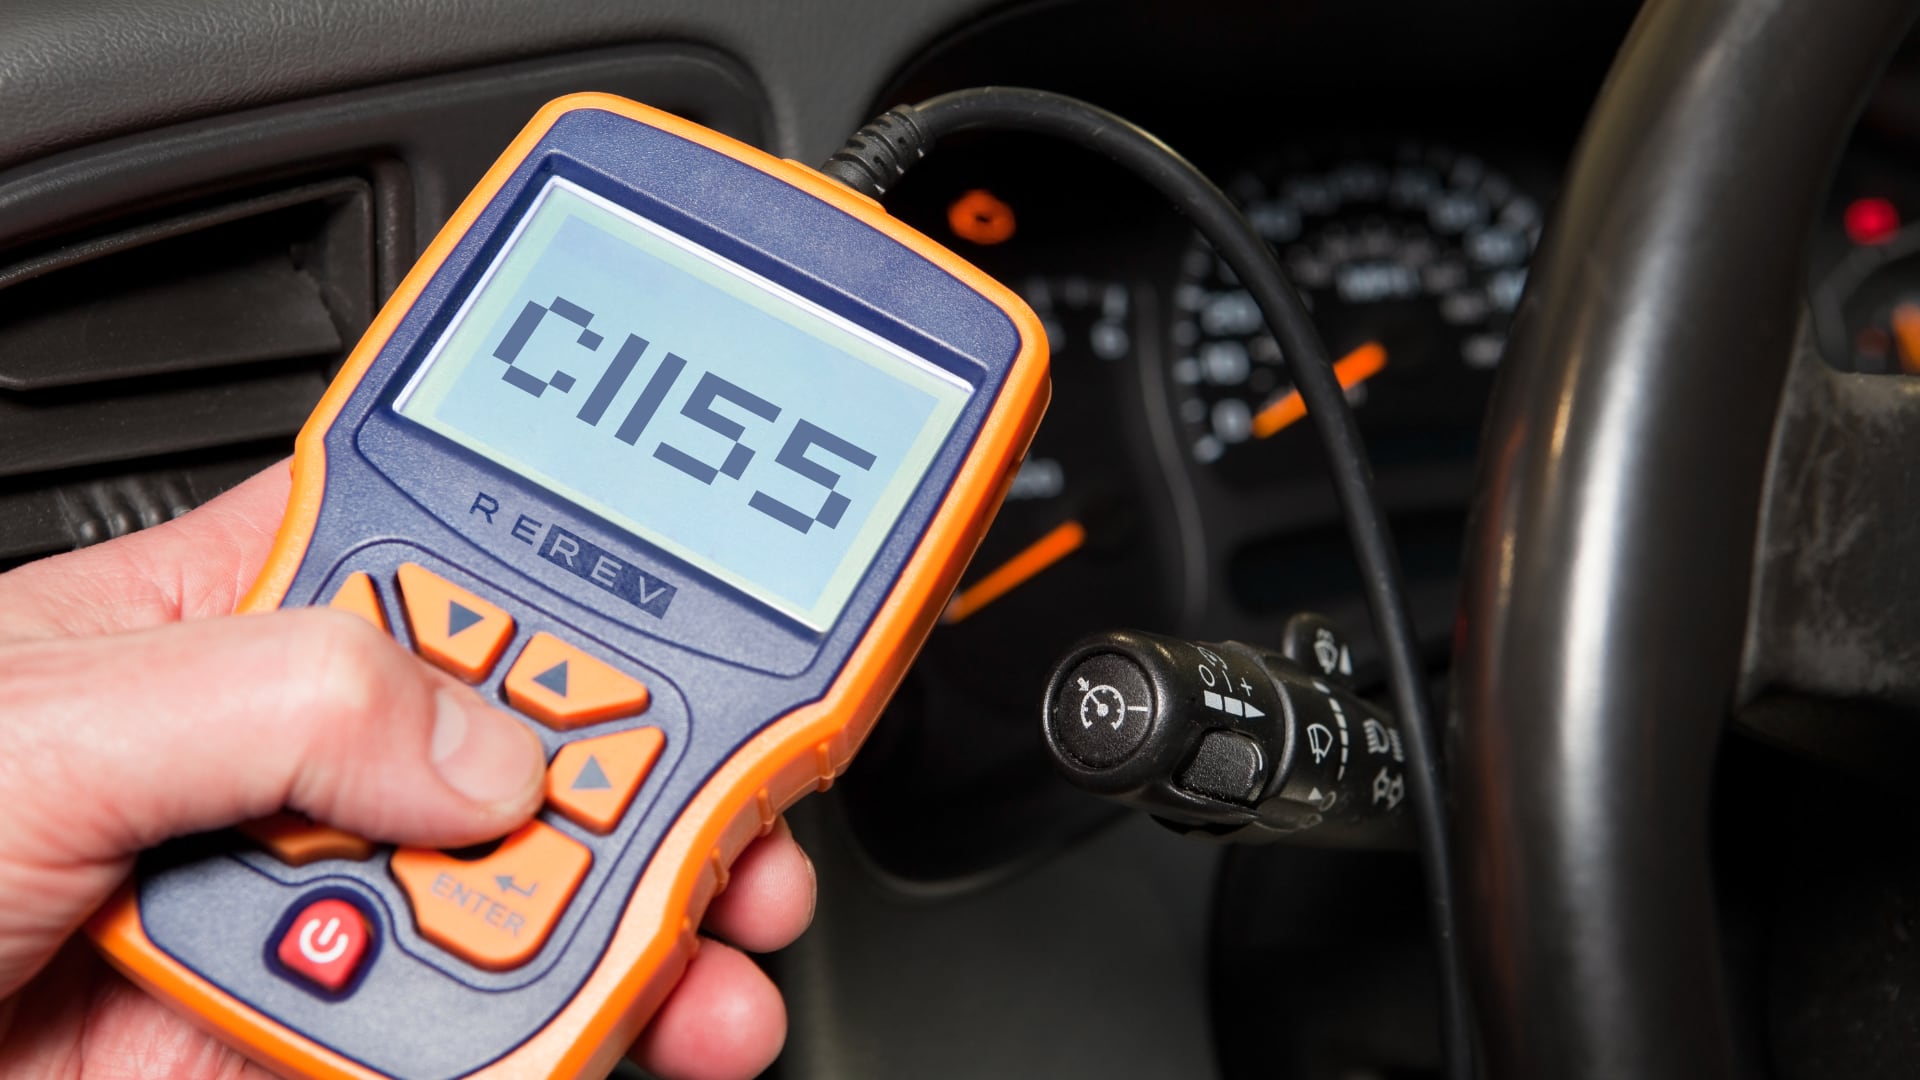 A person holding a ciss scanner in a car.